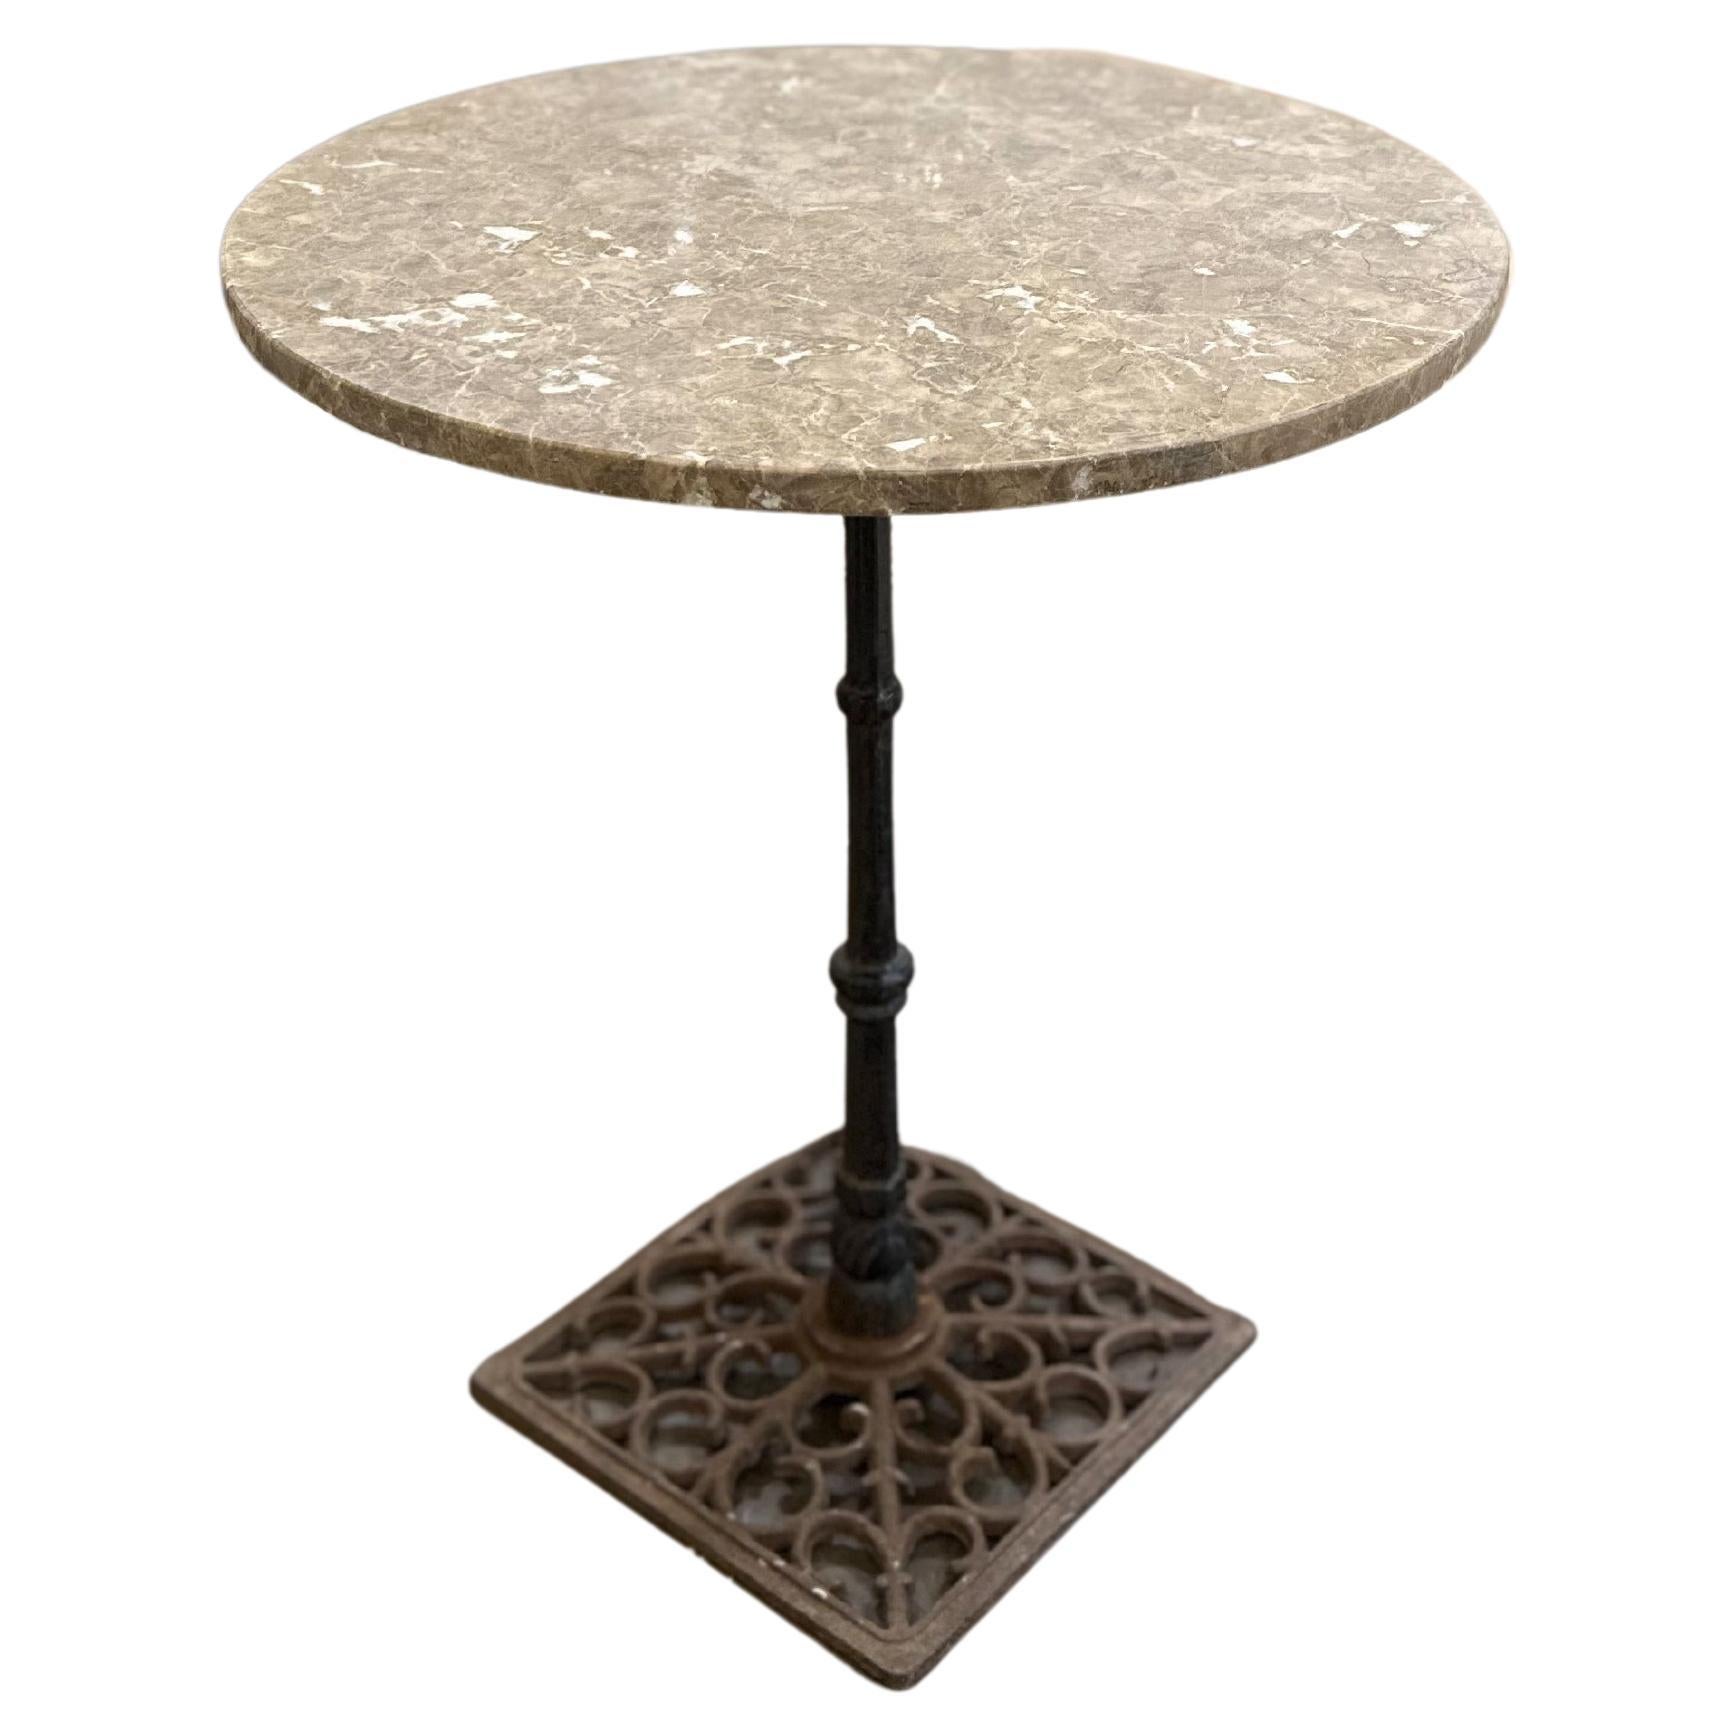 Recently discovered during our time in Northern France, this heavy French iron bistro table is topped with a 24 inch marble top. The iron detail in the base is quite beautiful and the solid marble top includes creamy greys and white coloring.